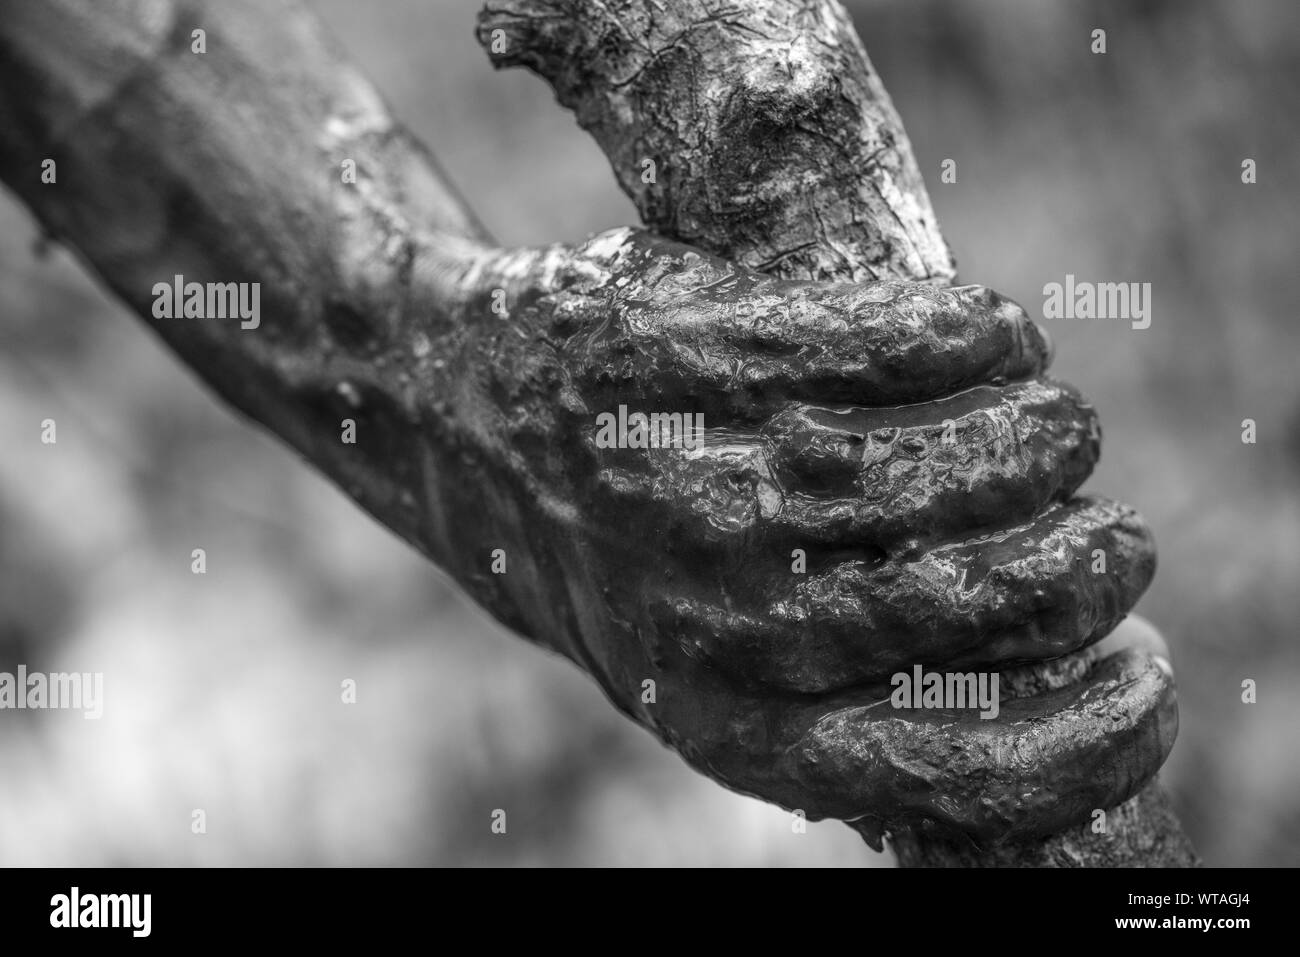 Muddy hand of a native picking up crabs in mangrove Stock Photo